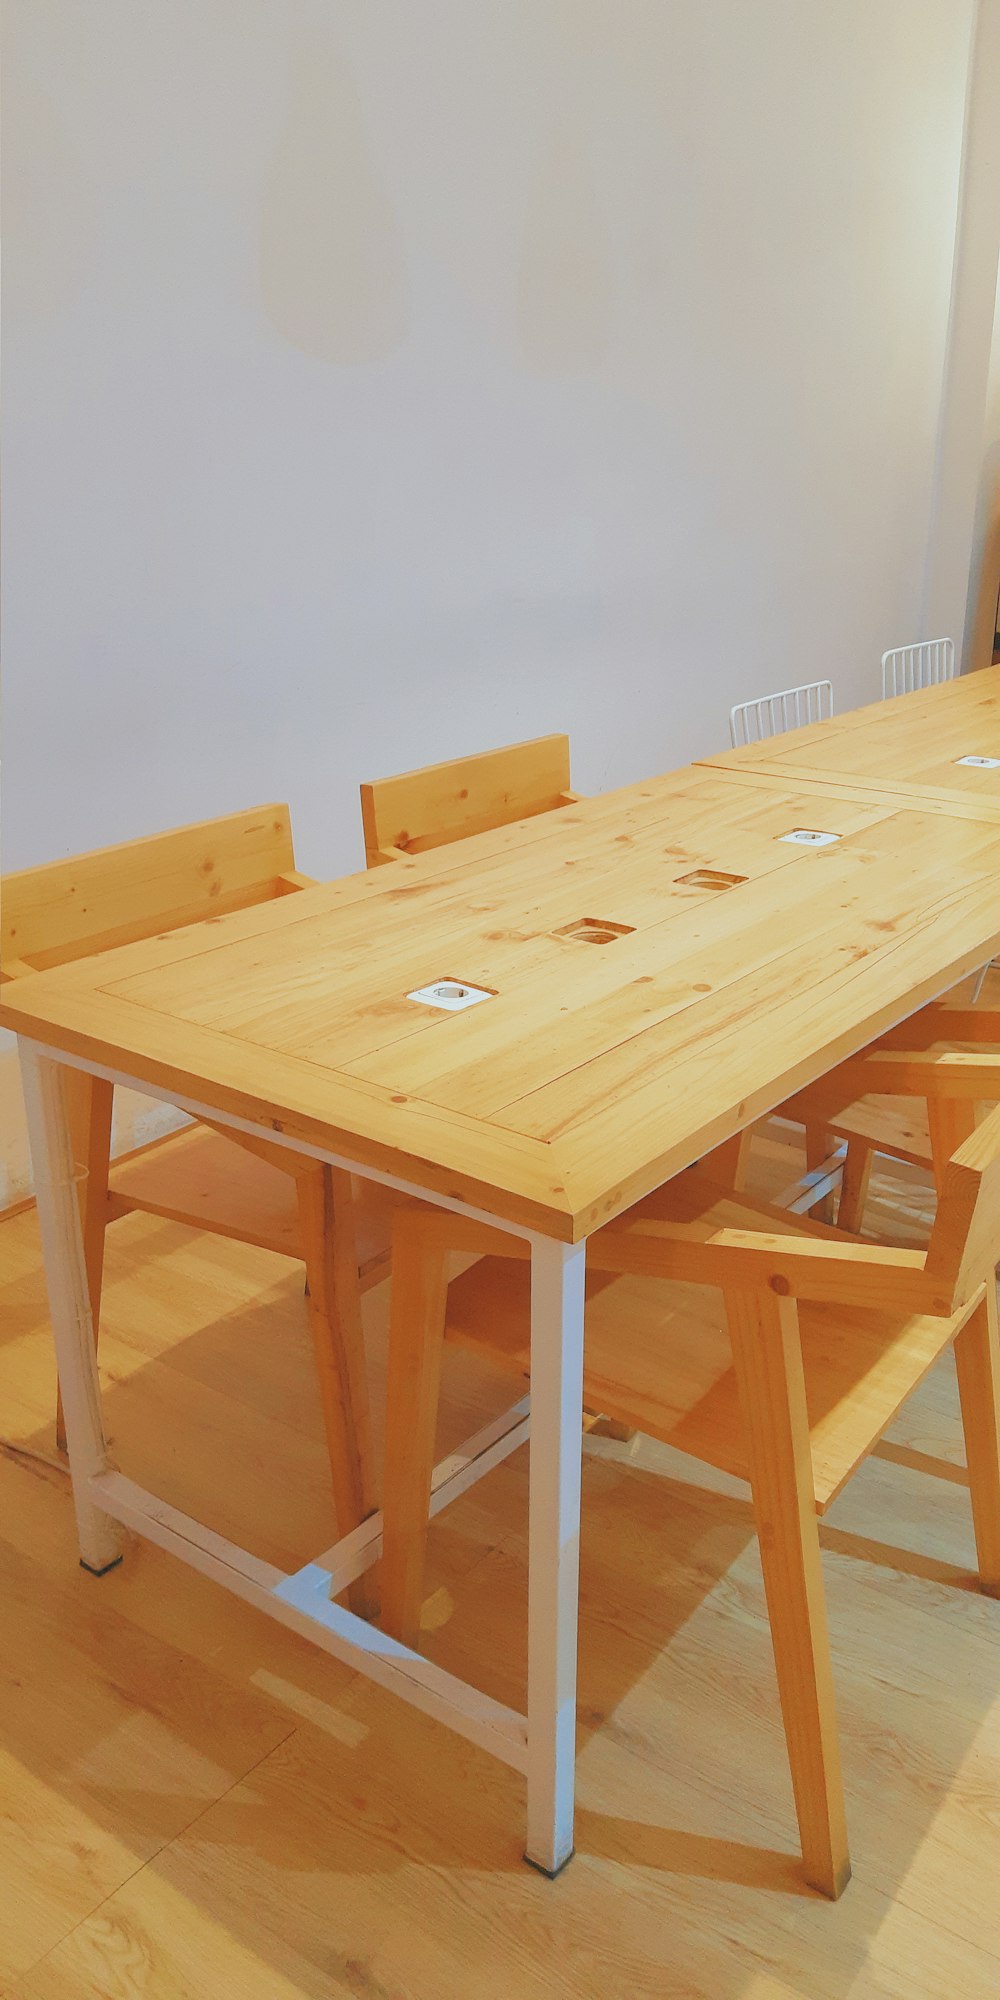 empty brown wooden dining table set